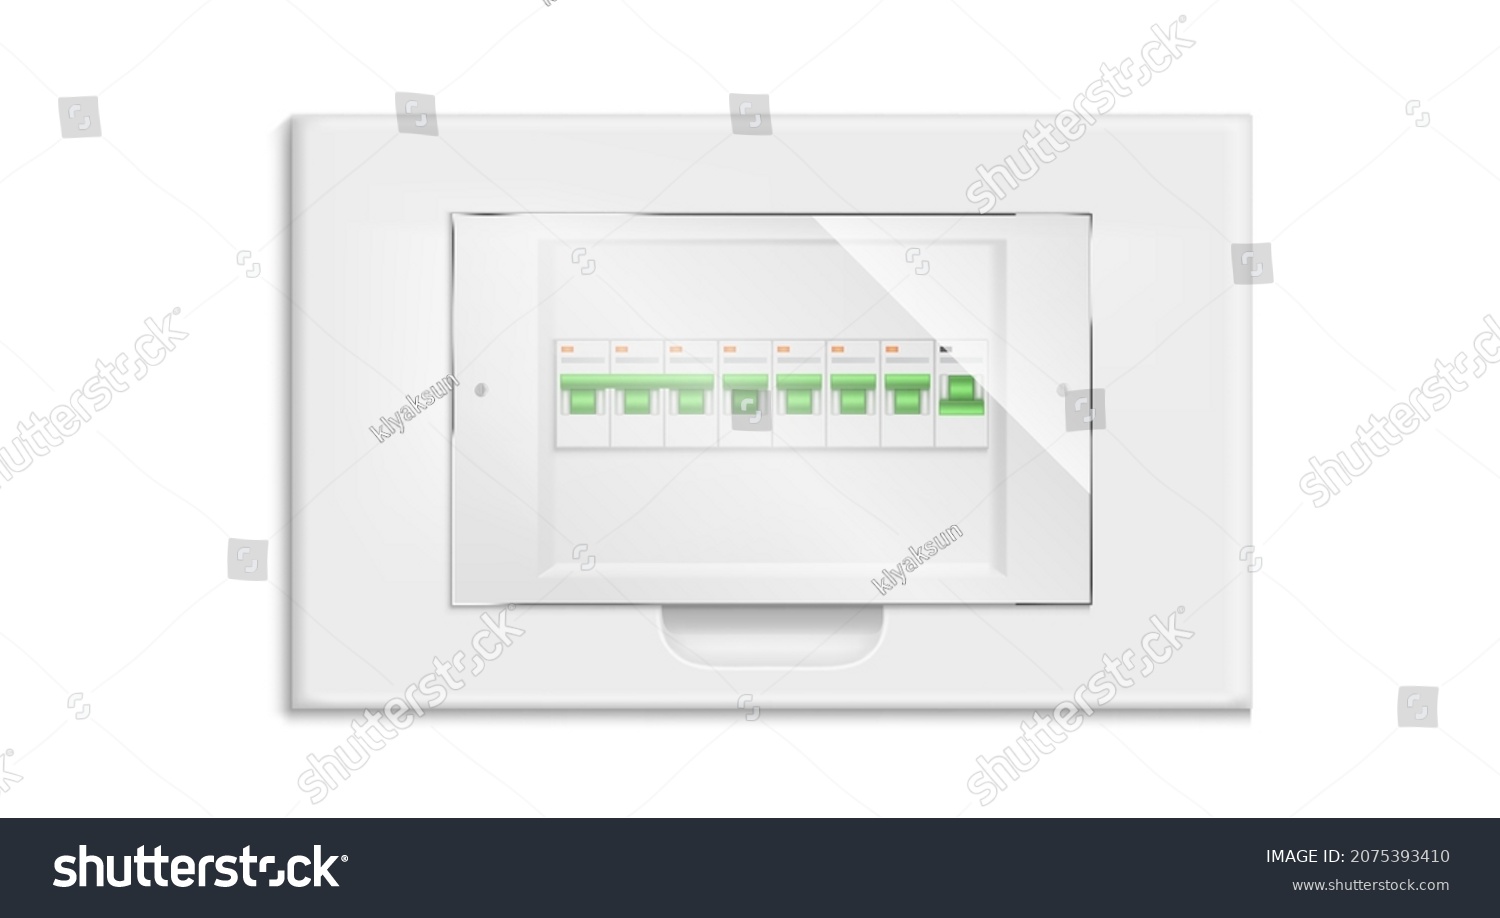 SVG of Fuse box, electrical panel with on and off switchers, automatic circuit breaker isolated on white background. Switchboard equipment for power control and distribution, Realistic 3d vector illustration svg